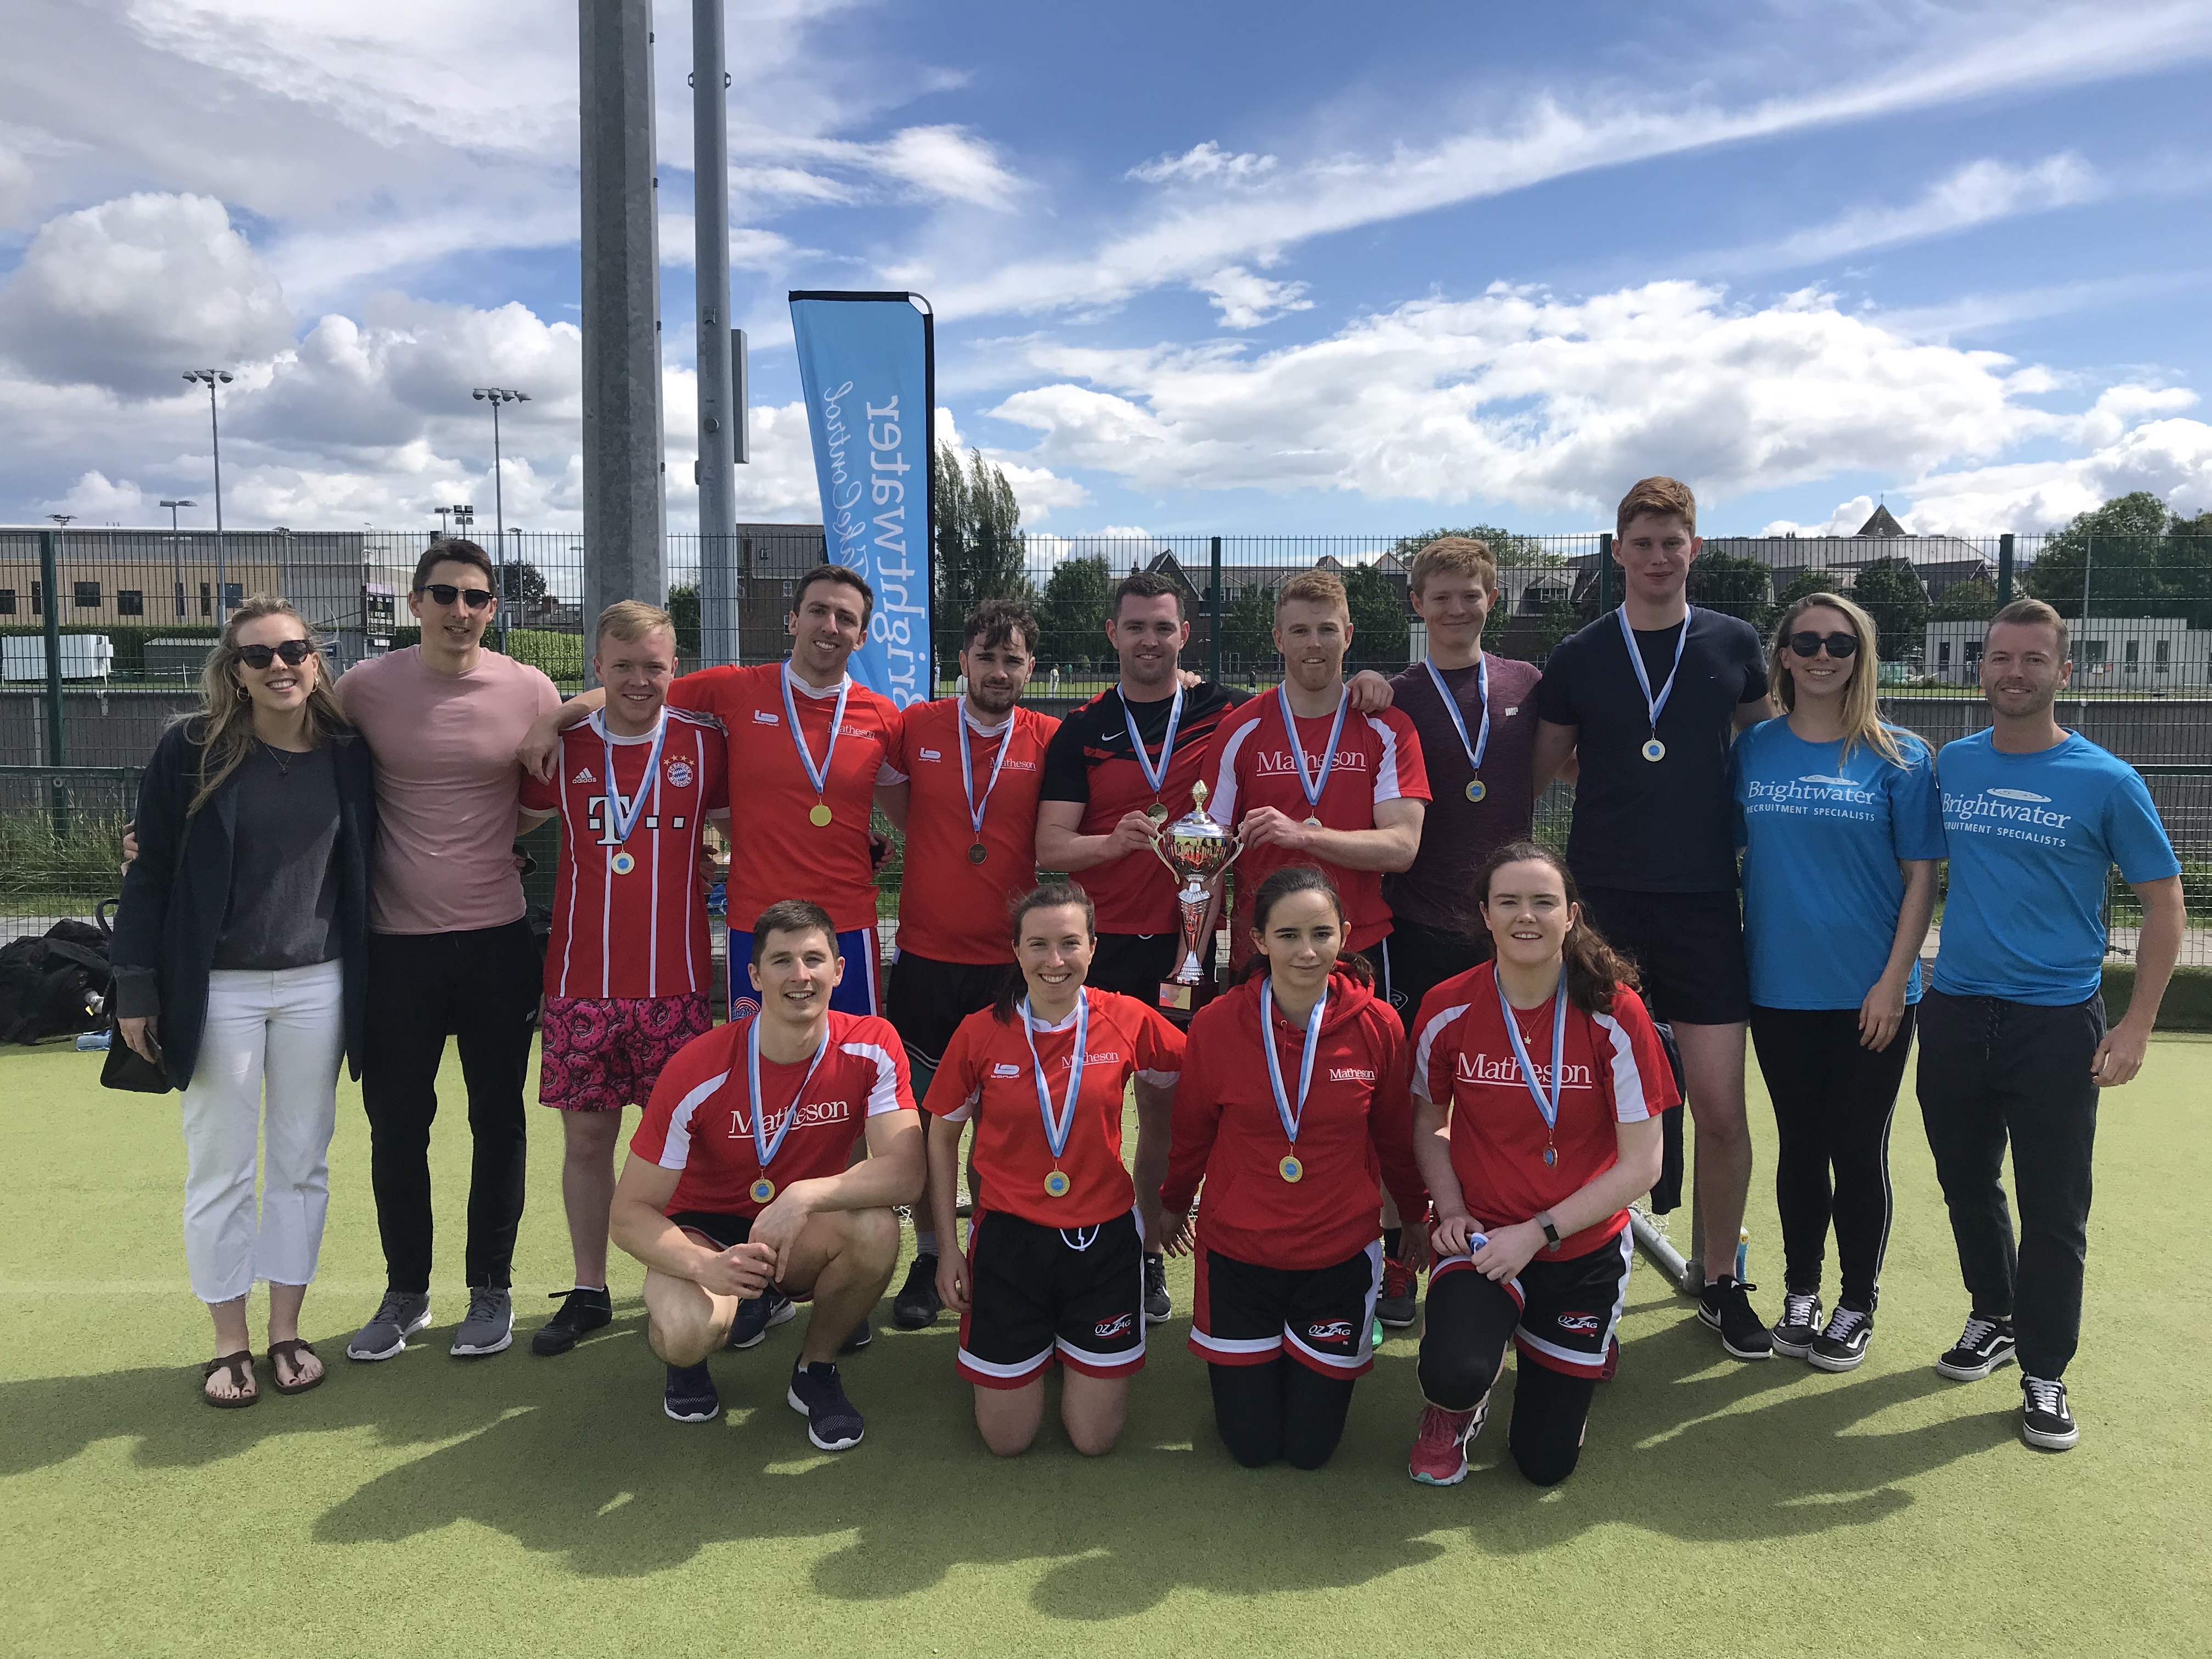 Winners of the SYS Tag Rugby 2019 Matheson Law